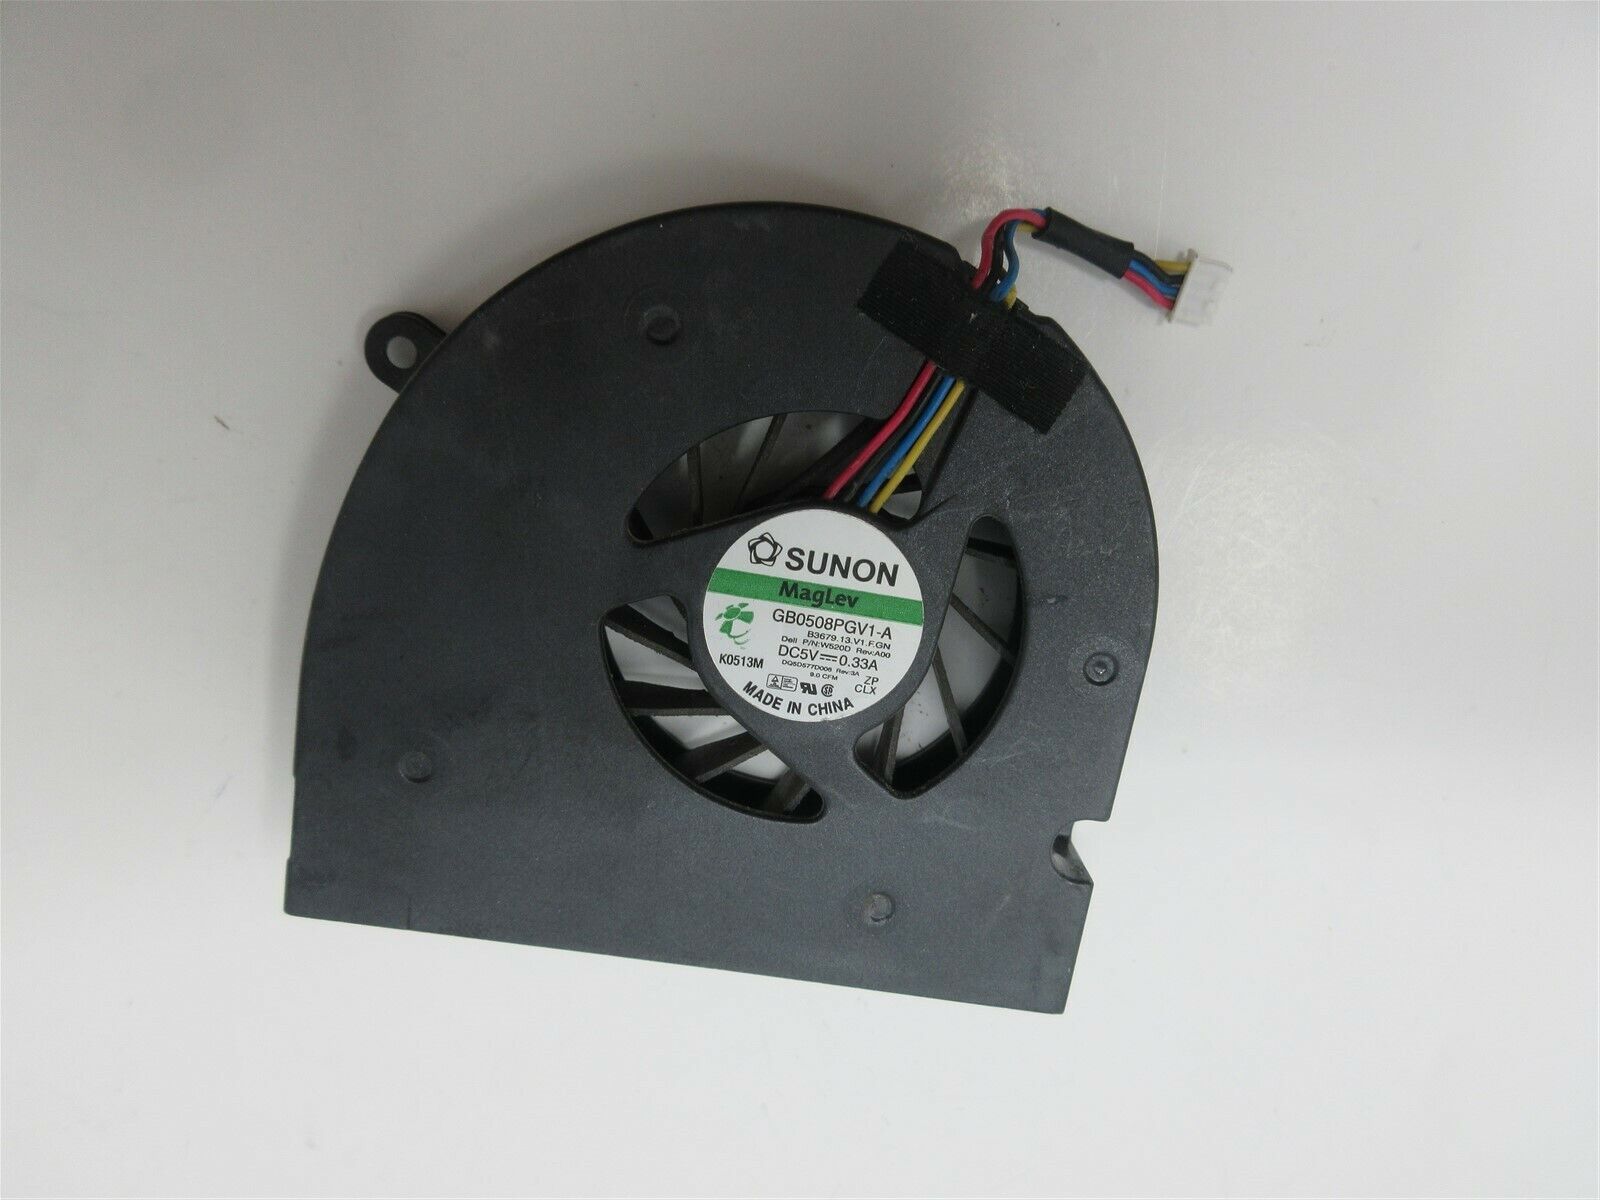 DELL Inspiron 1520 1521 Cool CPU Cooling Internal Sunon GB0507PGV1-A Fan FP377 